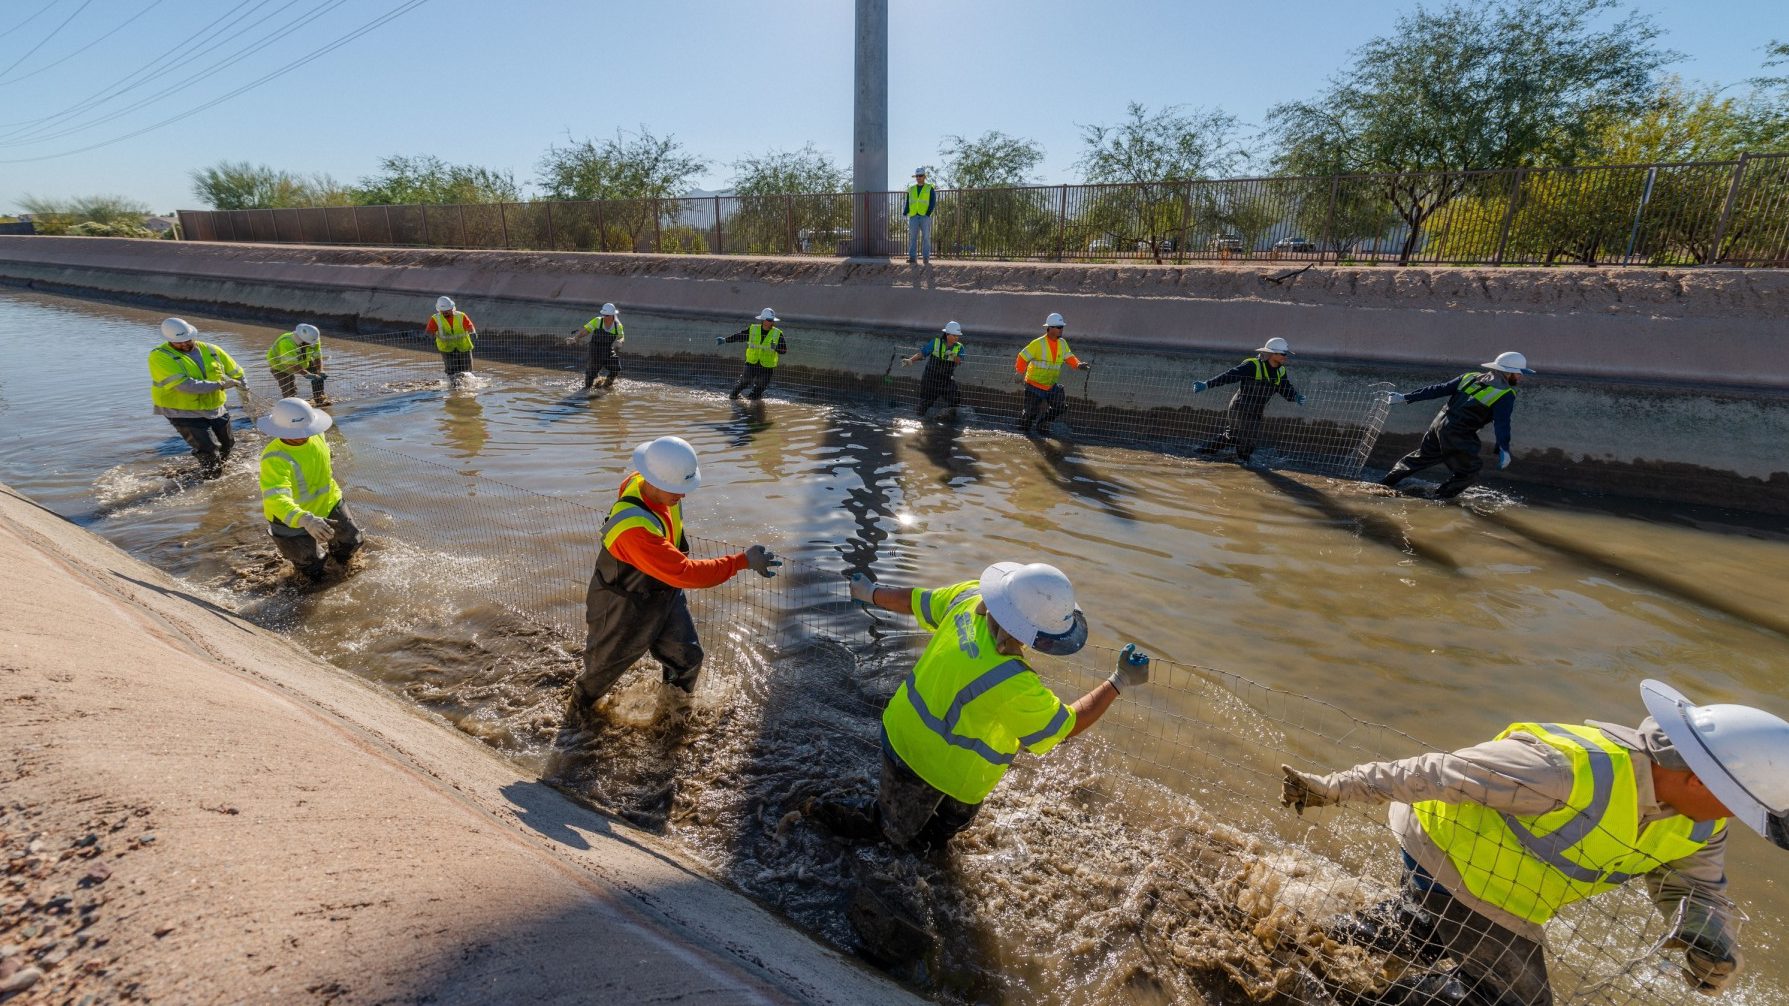 portion-of-srp-canal-in-phoenix-to-be-drained-starting-friday